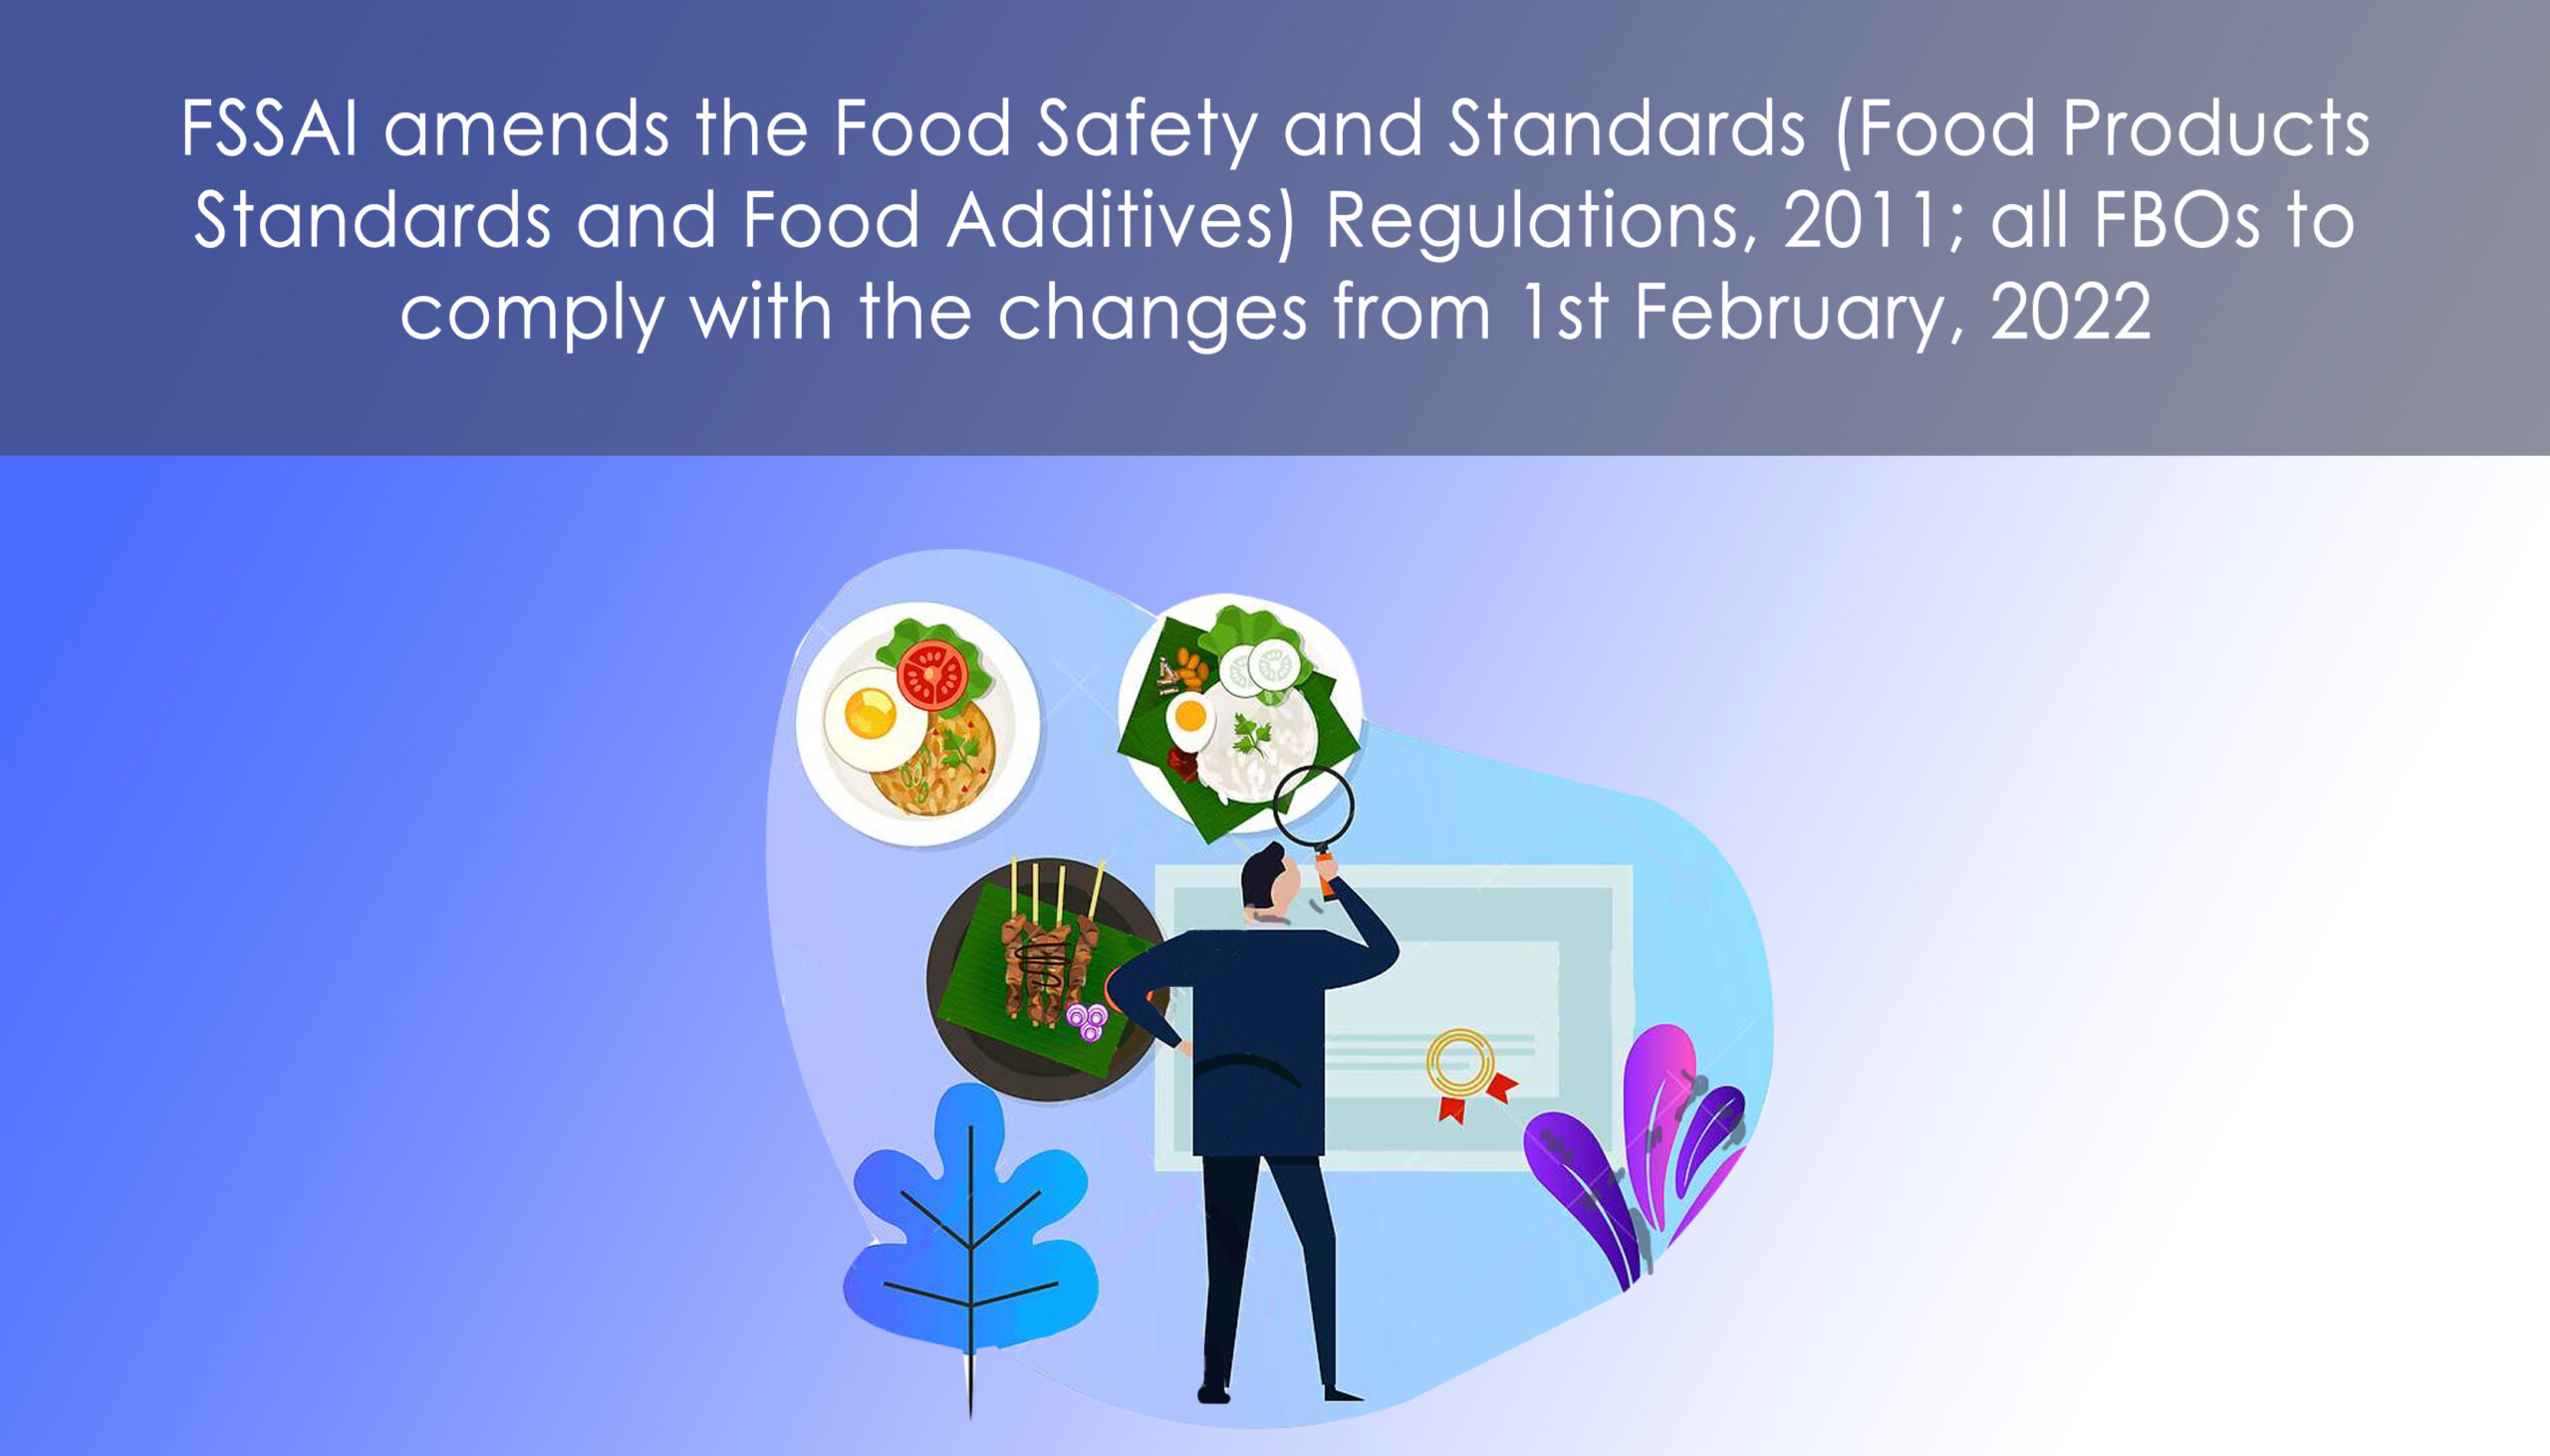 FSSAI amends the Food Safety and Standards (Food Products Standards and Food Additives) Regulations, 2011; all FBOs to comply with the changes from 1st February, 2022